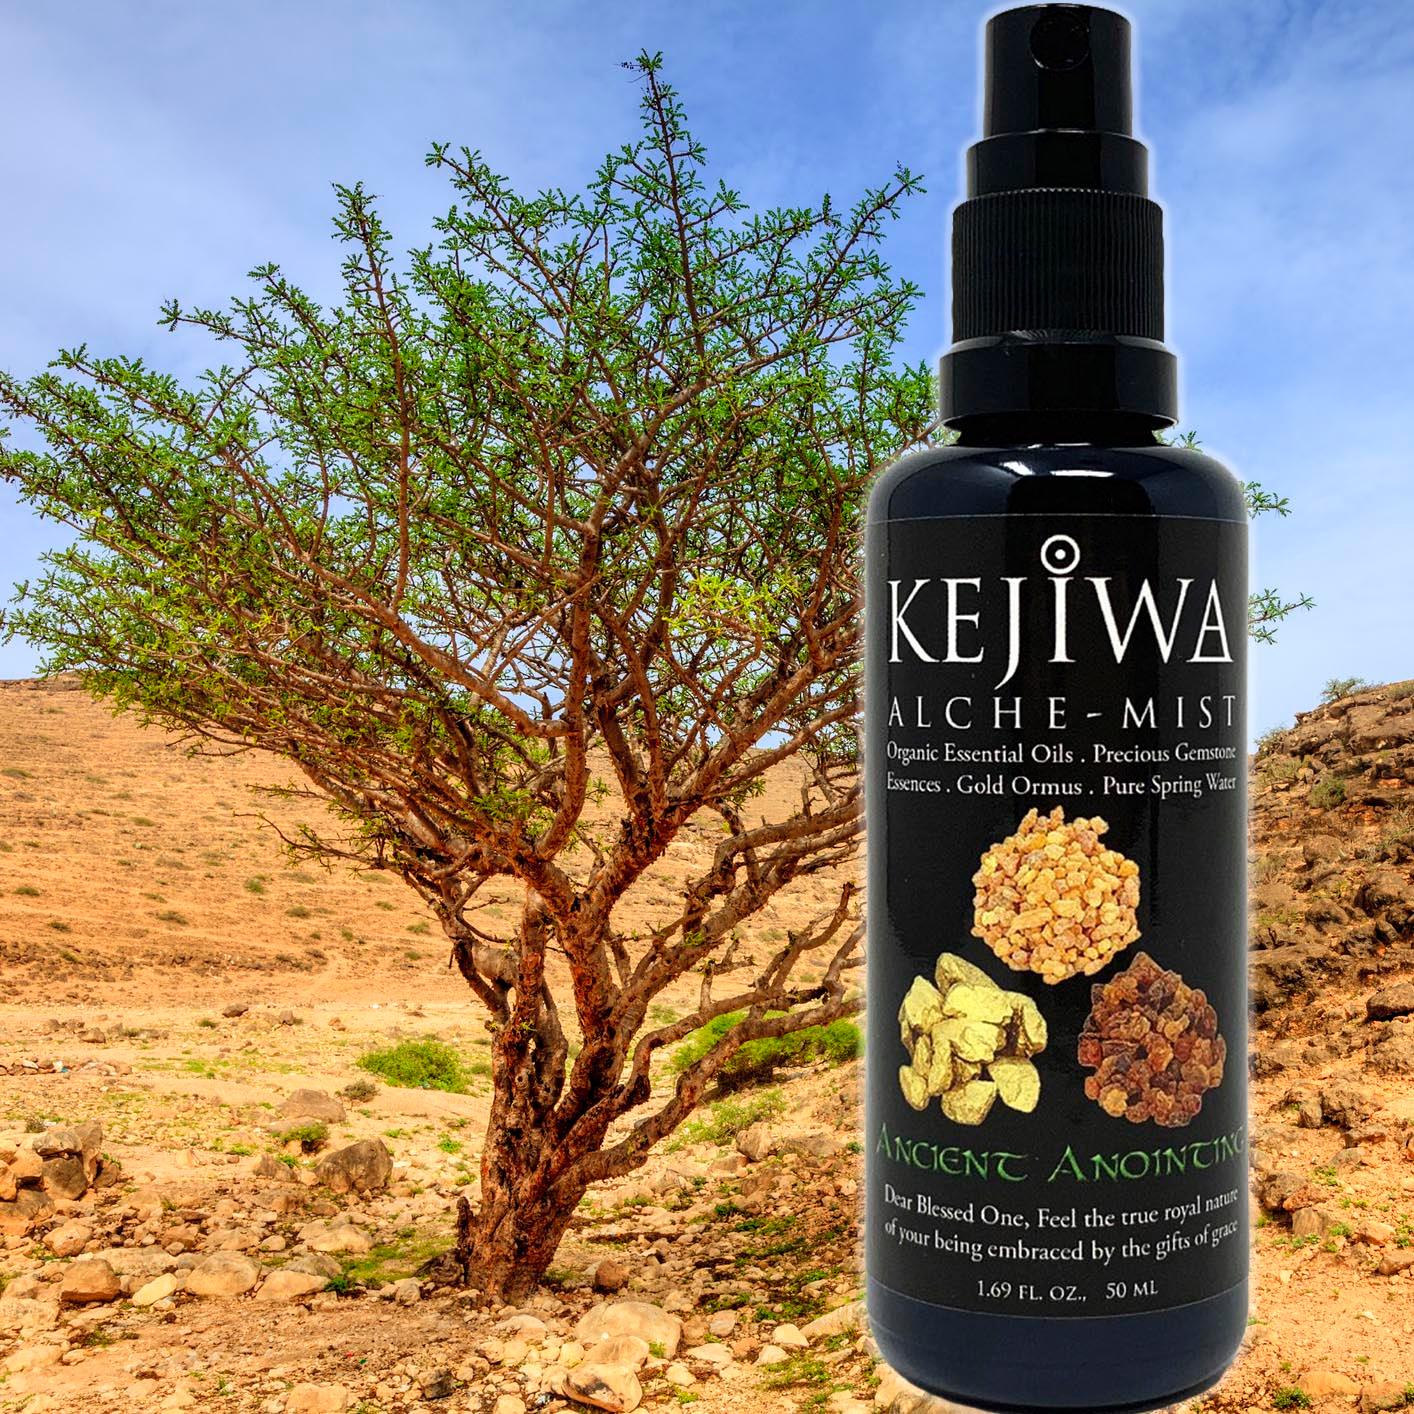 Ancient Anointing Alche-Mist with Omani Frankincense tree